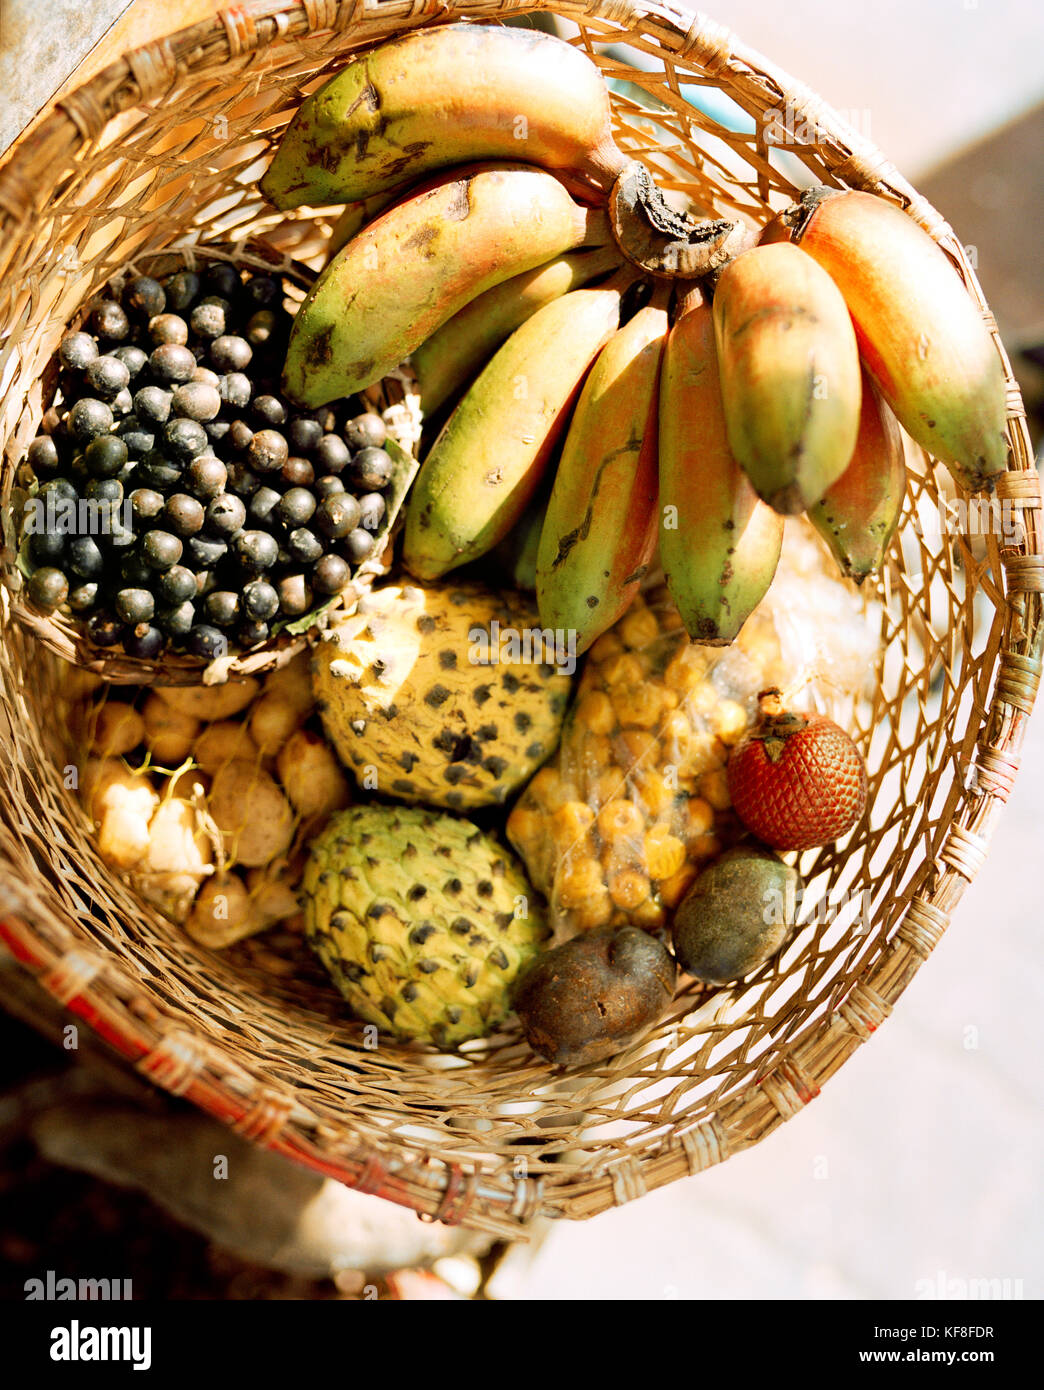 Brazil, Belem, South America, variety of Amazon fruit kept in basket for sale at market, elevated view Stock Photo